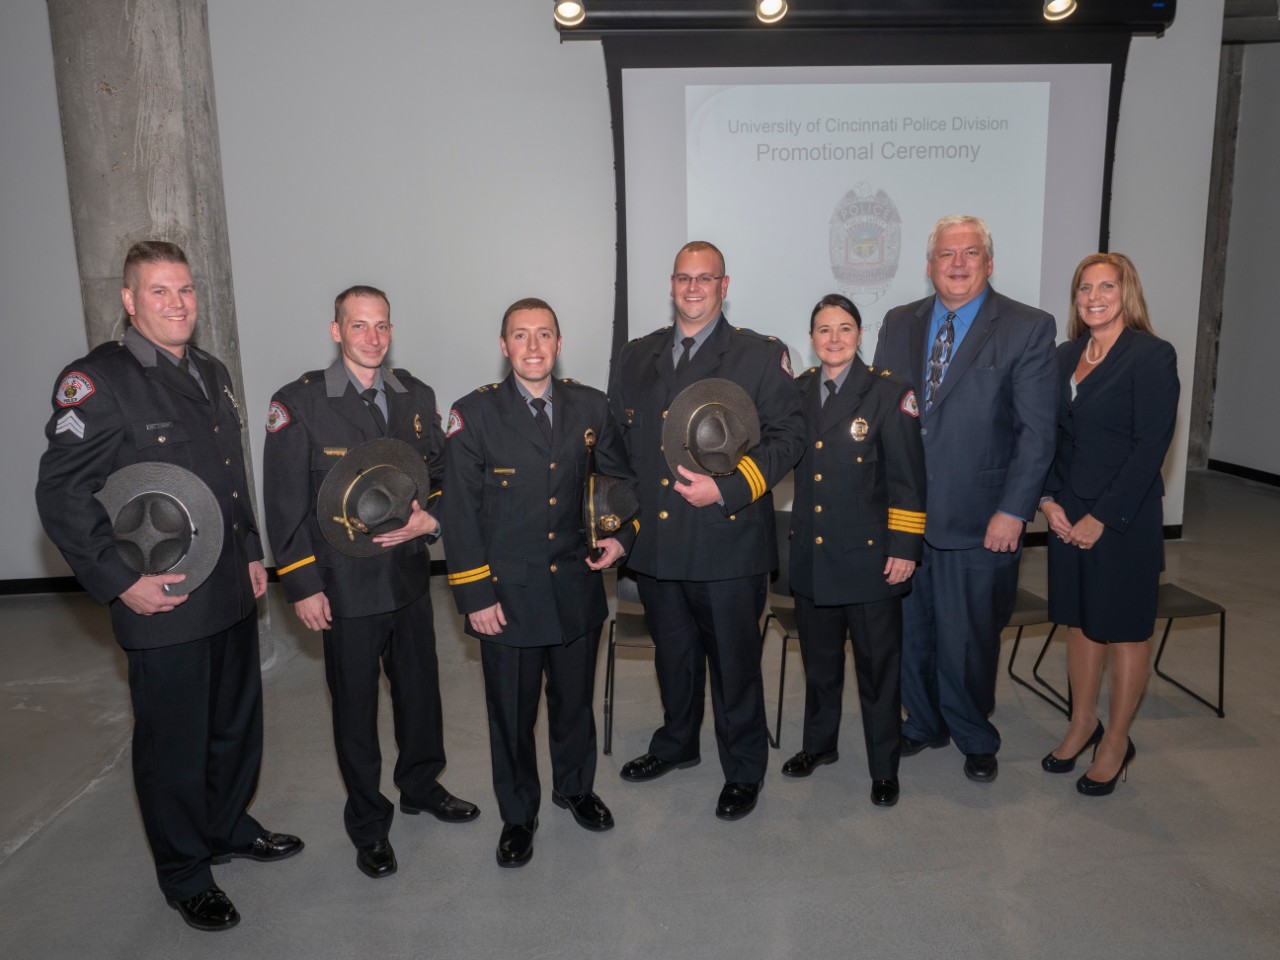 Vice President of Safety and Reform Robin Engel, Director of Public Safety James Whalen and UC Police Chief Maris Herold stand with the four newly promoted officer during a ceremony on Nov. 9.